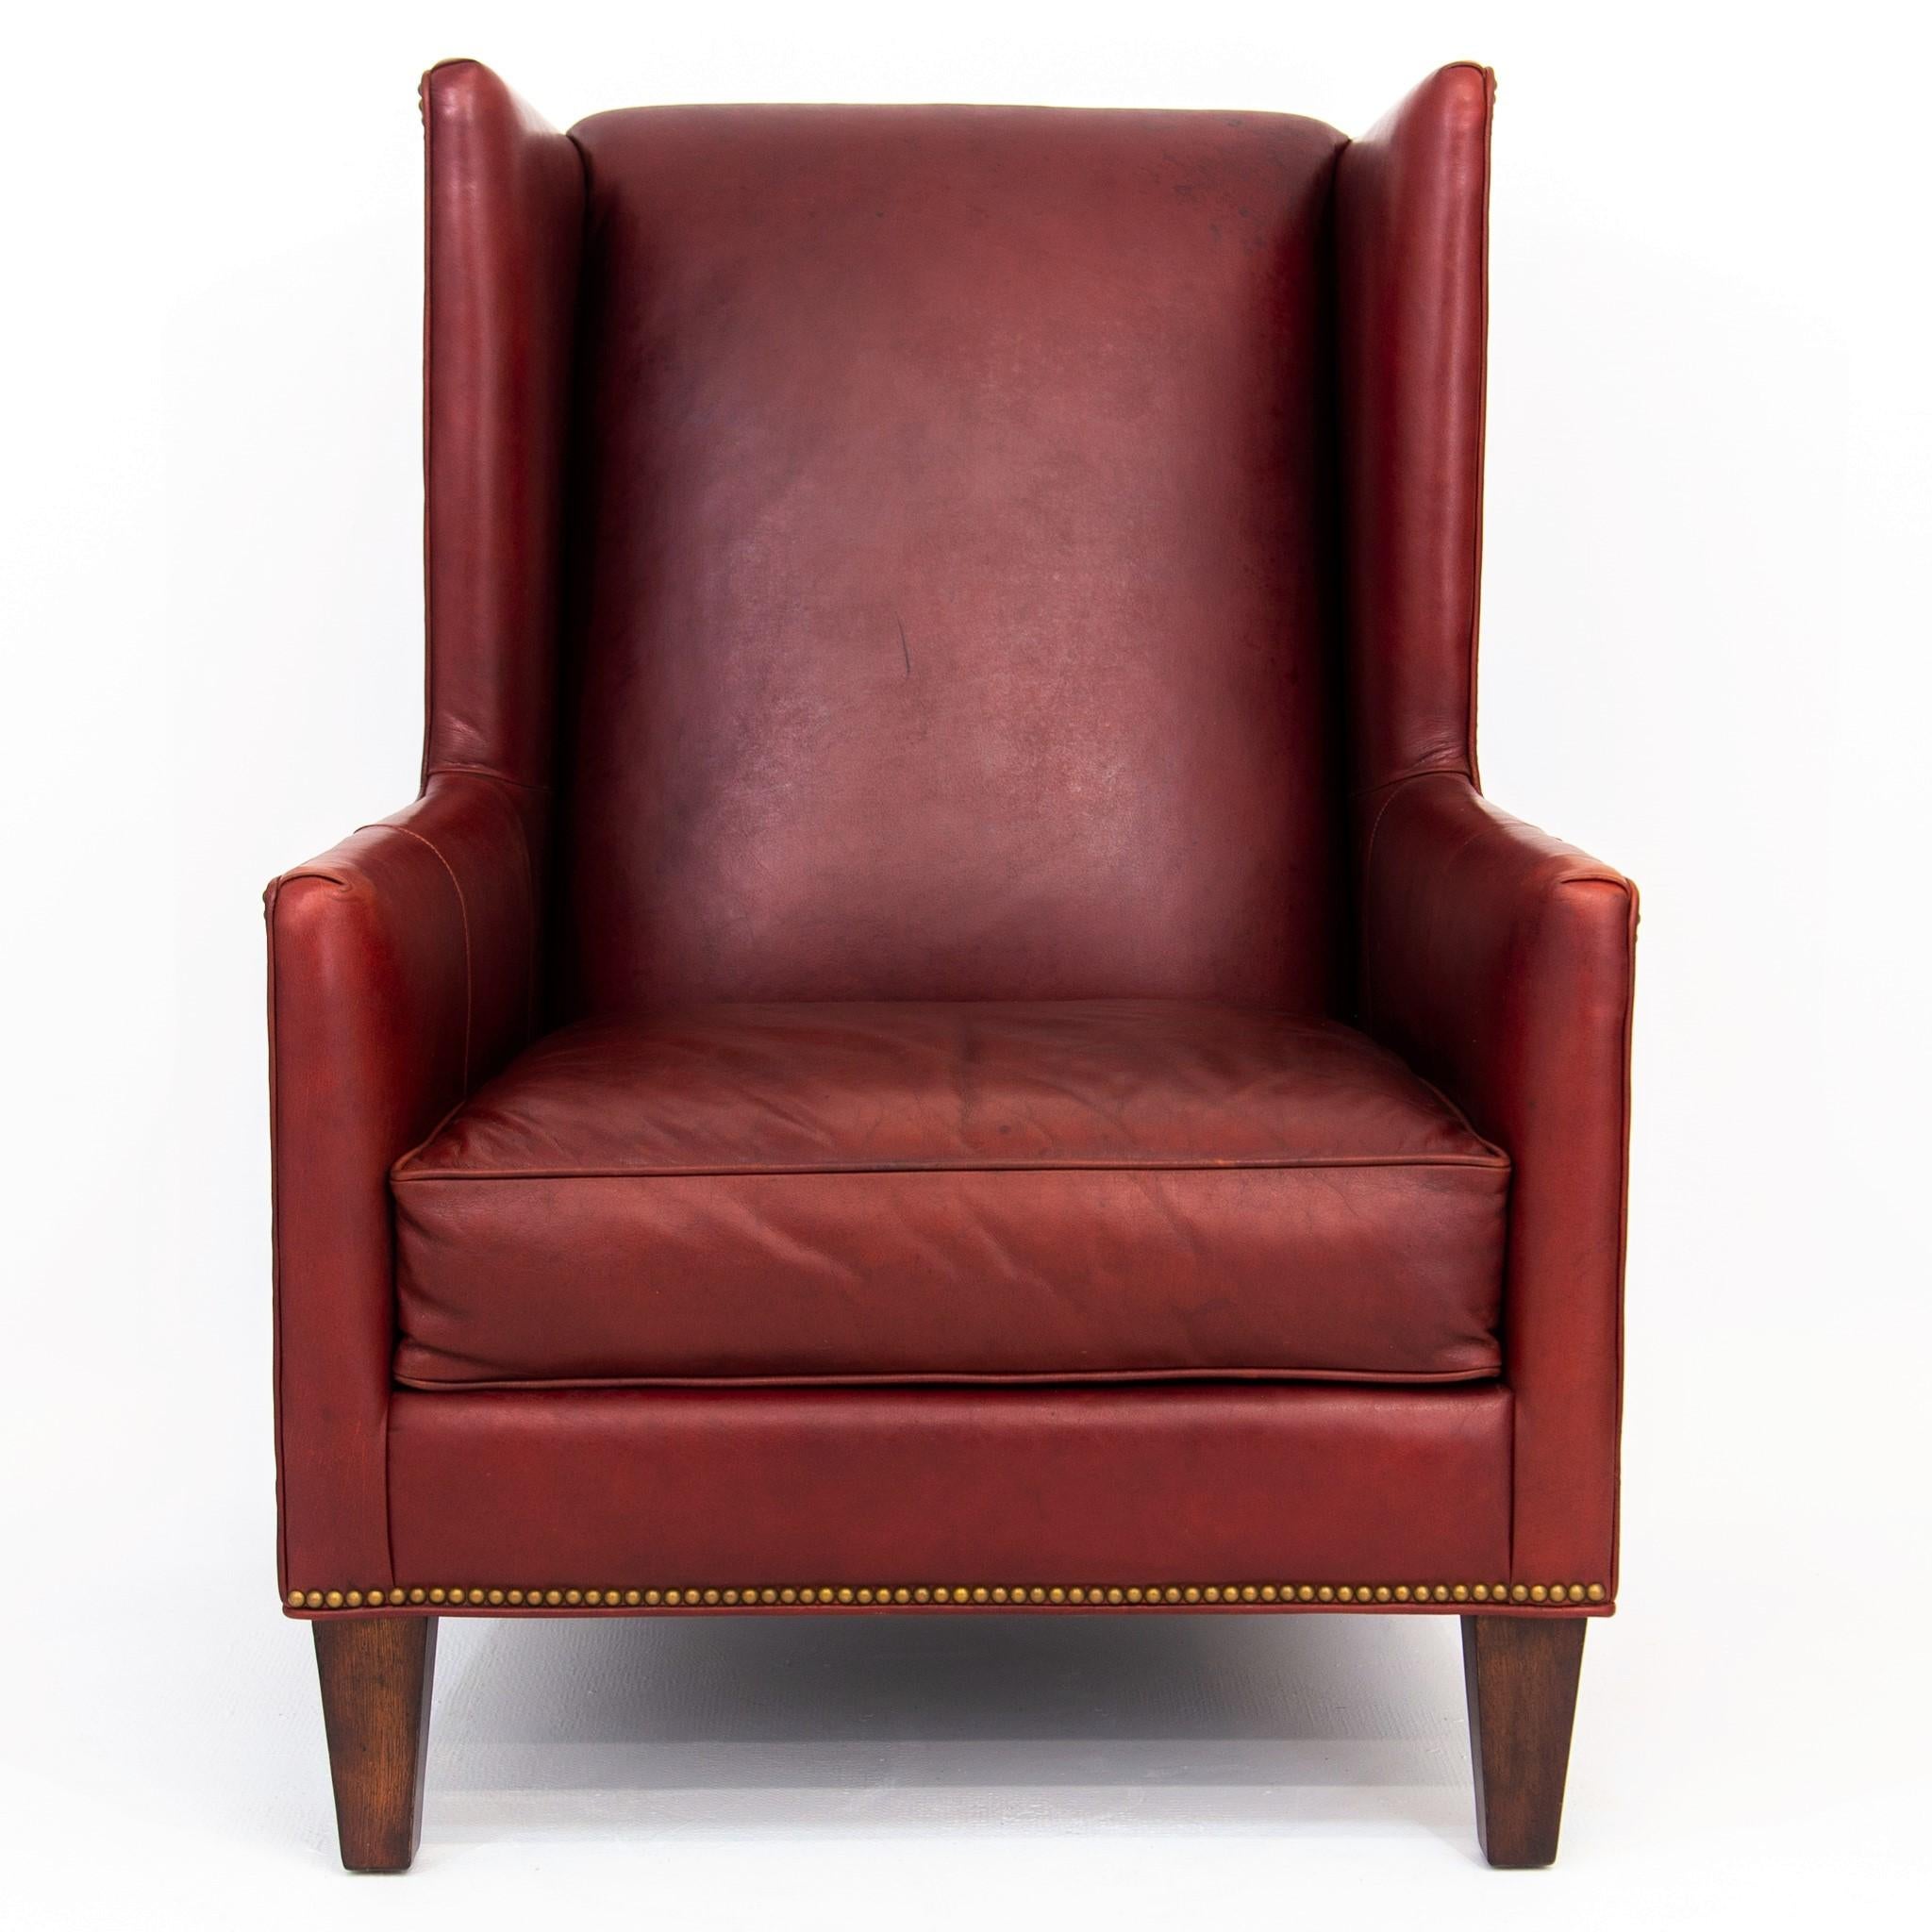 Contemporary Deep Red Leather Wingback Fireside Chair with Brass Nailhead Trim by Massoud